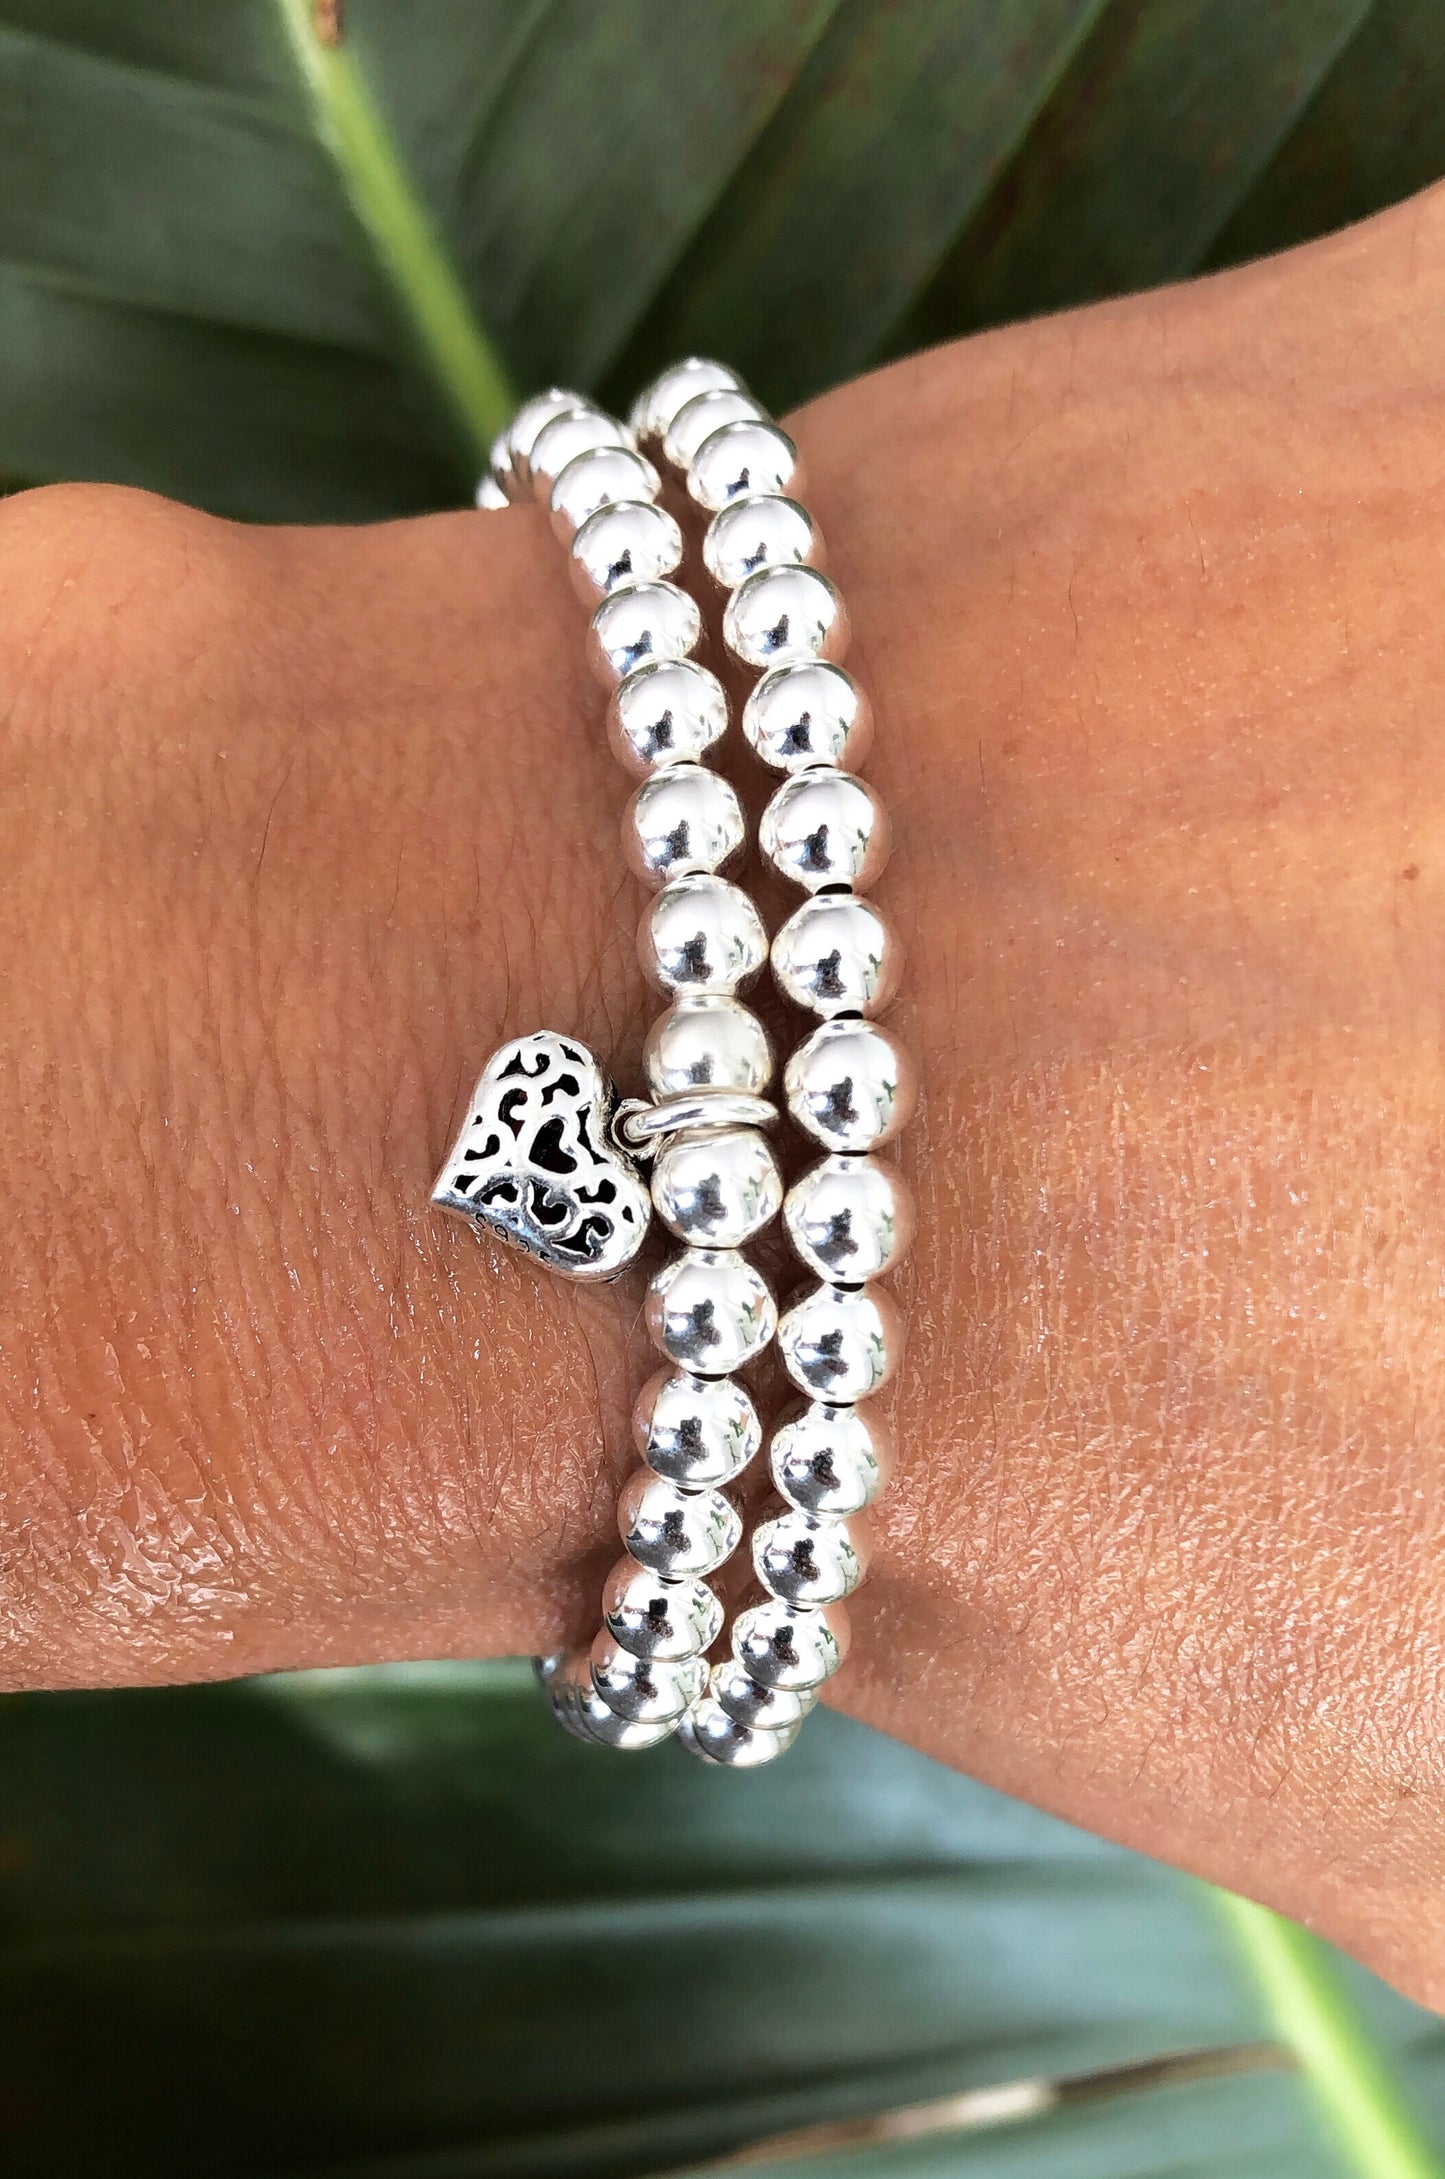 5mm Beaded Silver bracelet with Tibetan heart charm at RM KANDY